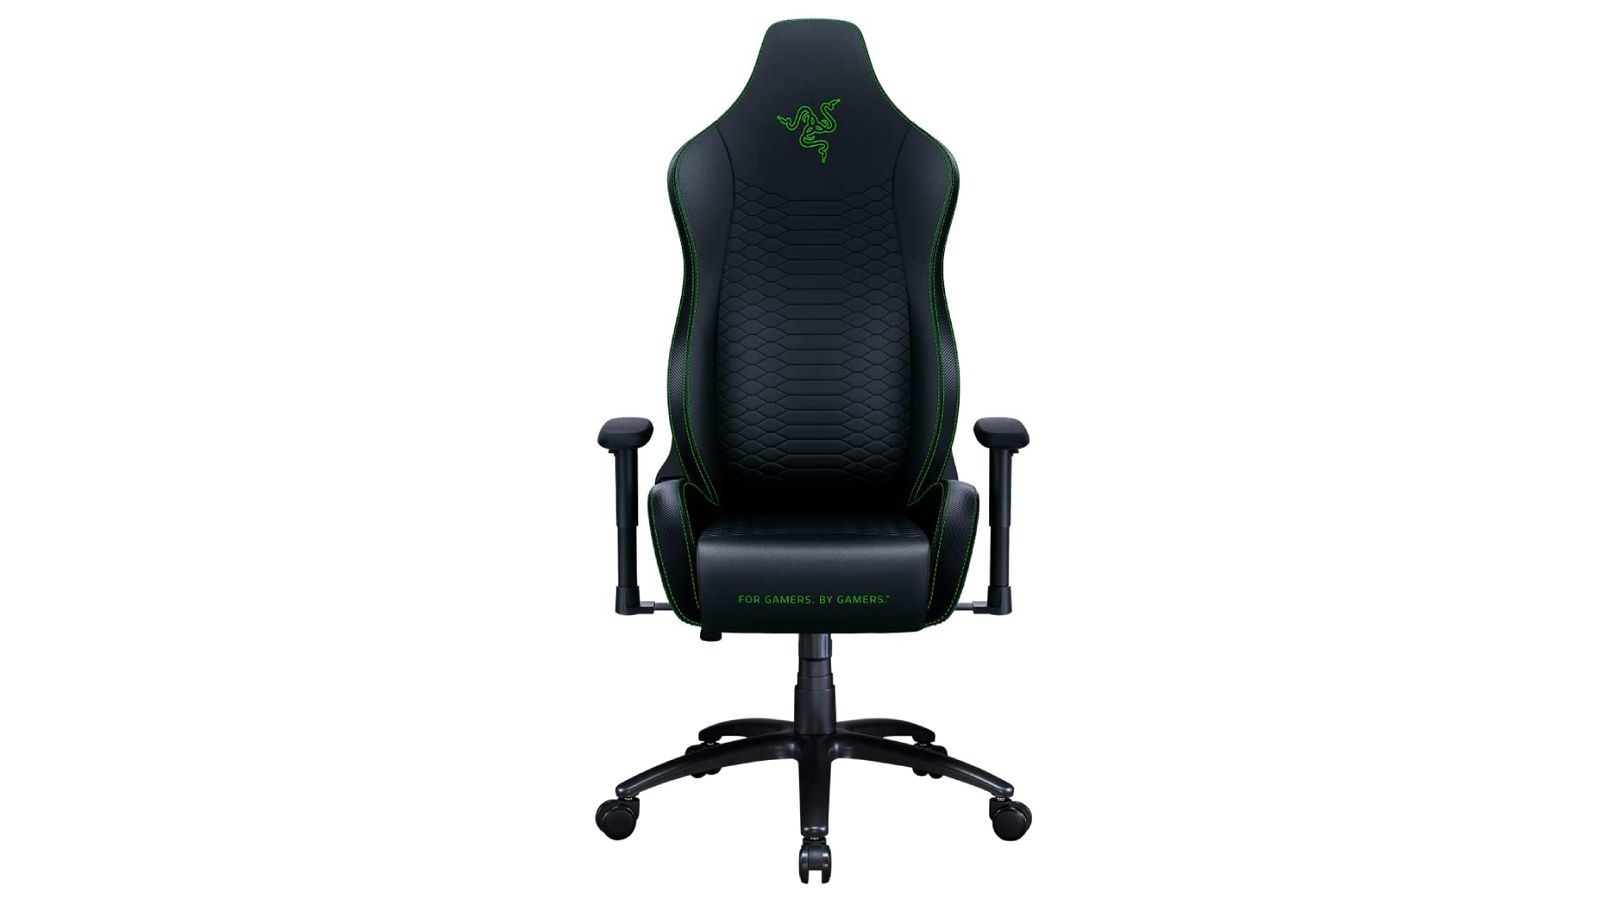 Razer Iskur product image of a black office-style chair featuring green Razer branding.